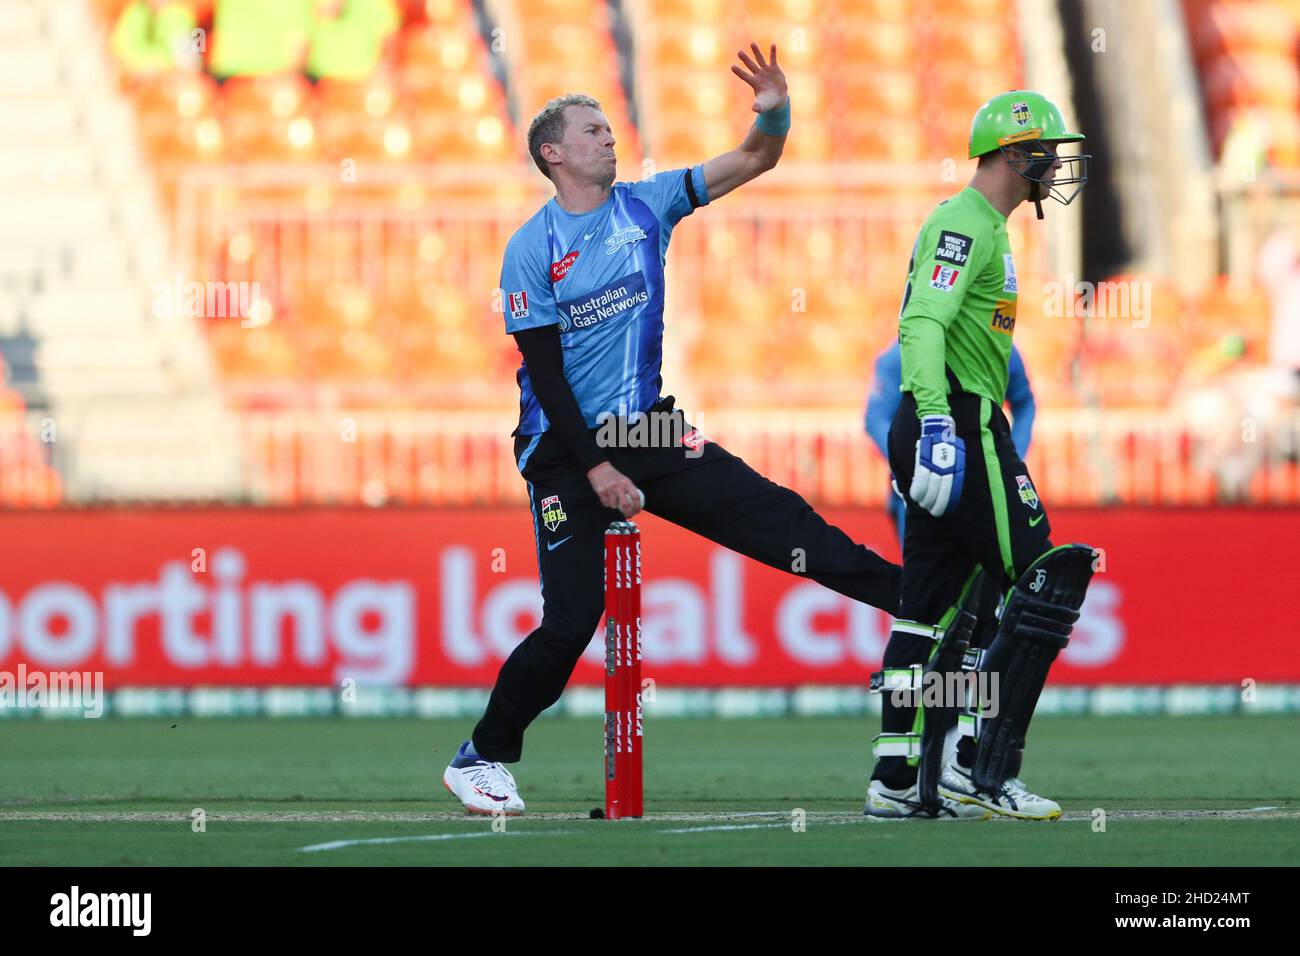 Sydney, Australia. 2nd January 2022; Sydney Showground Stadium, Sydney Olympic Park, NSW, Australia; BBL Big Bash League cricket, Sydney Thunder versus Adelaide Strikers; Peter Siddle of Adelaide Strikers in bowling action Credit: Action Plus Sports Images/Alamy Live News Stock Photo